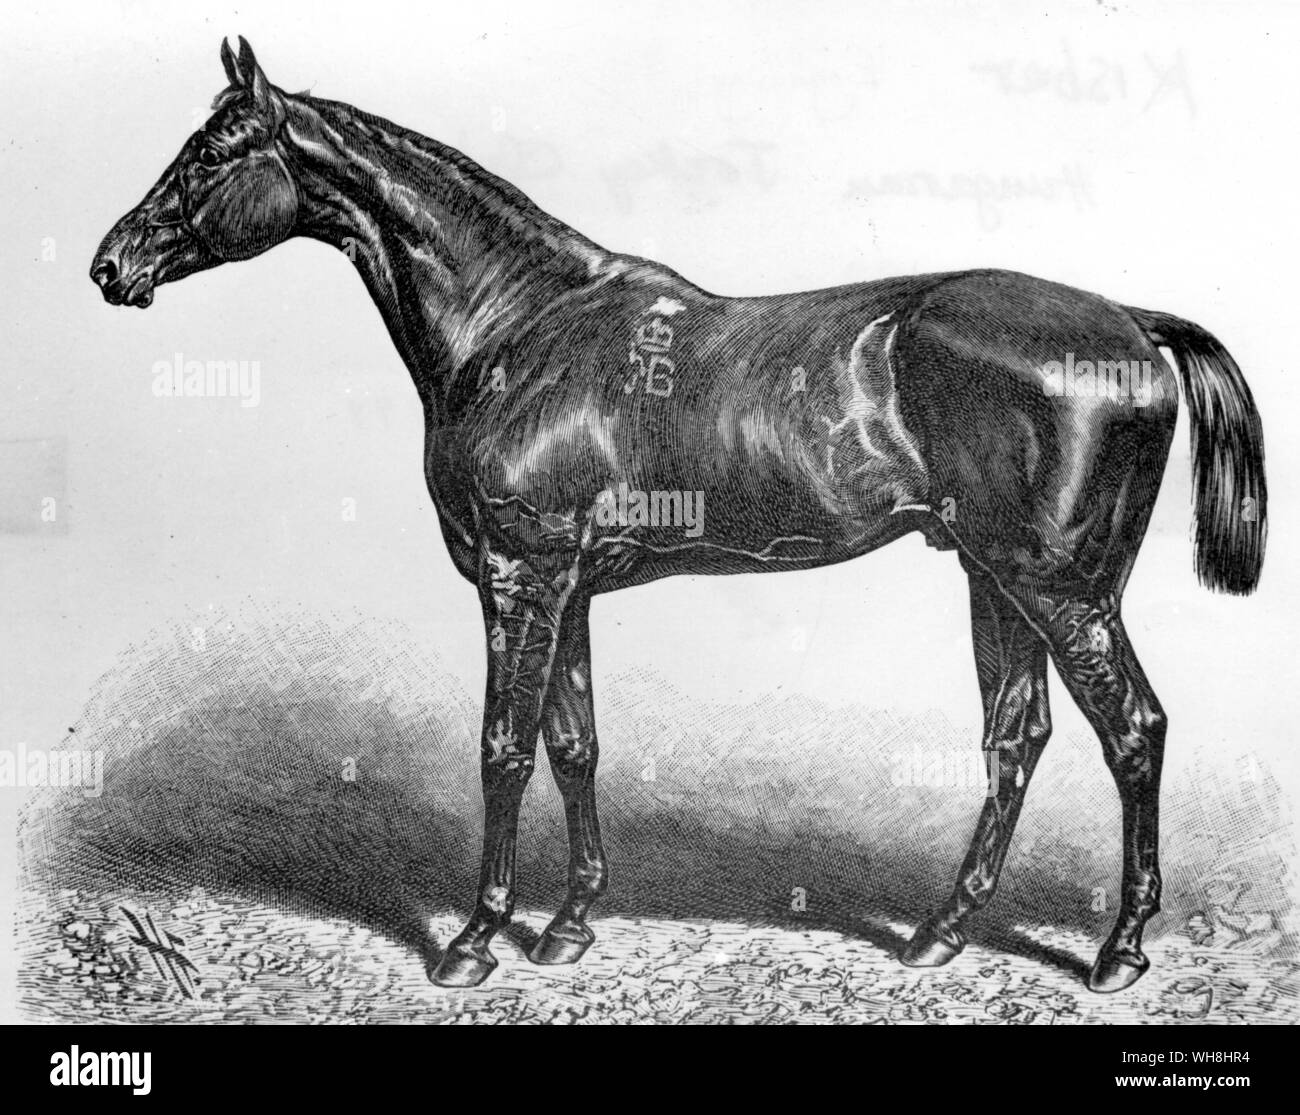 The 1876 Epsom Derby Winner was Hungarian-bred of imported English parents. He was by Buccaneer, by the Derby winner Wild Dayrell, who descended from Sir Peter Teazle, out of a Rataplan mare whose dam was by Birdcatcher. His owners in England were the jovial young Baltazzi brothers, Rugby educated Levantines. He appeared at Epsom on Derby day thanks to a moneylender who got the Baltazzis out of trouble with another moneylender. He was greatly fancied and won with great ease. He was nobbled before the St Leger. At stud he was disappointing. The History of Horse Racing by Roger Longrigg, page Stock Photo